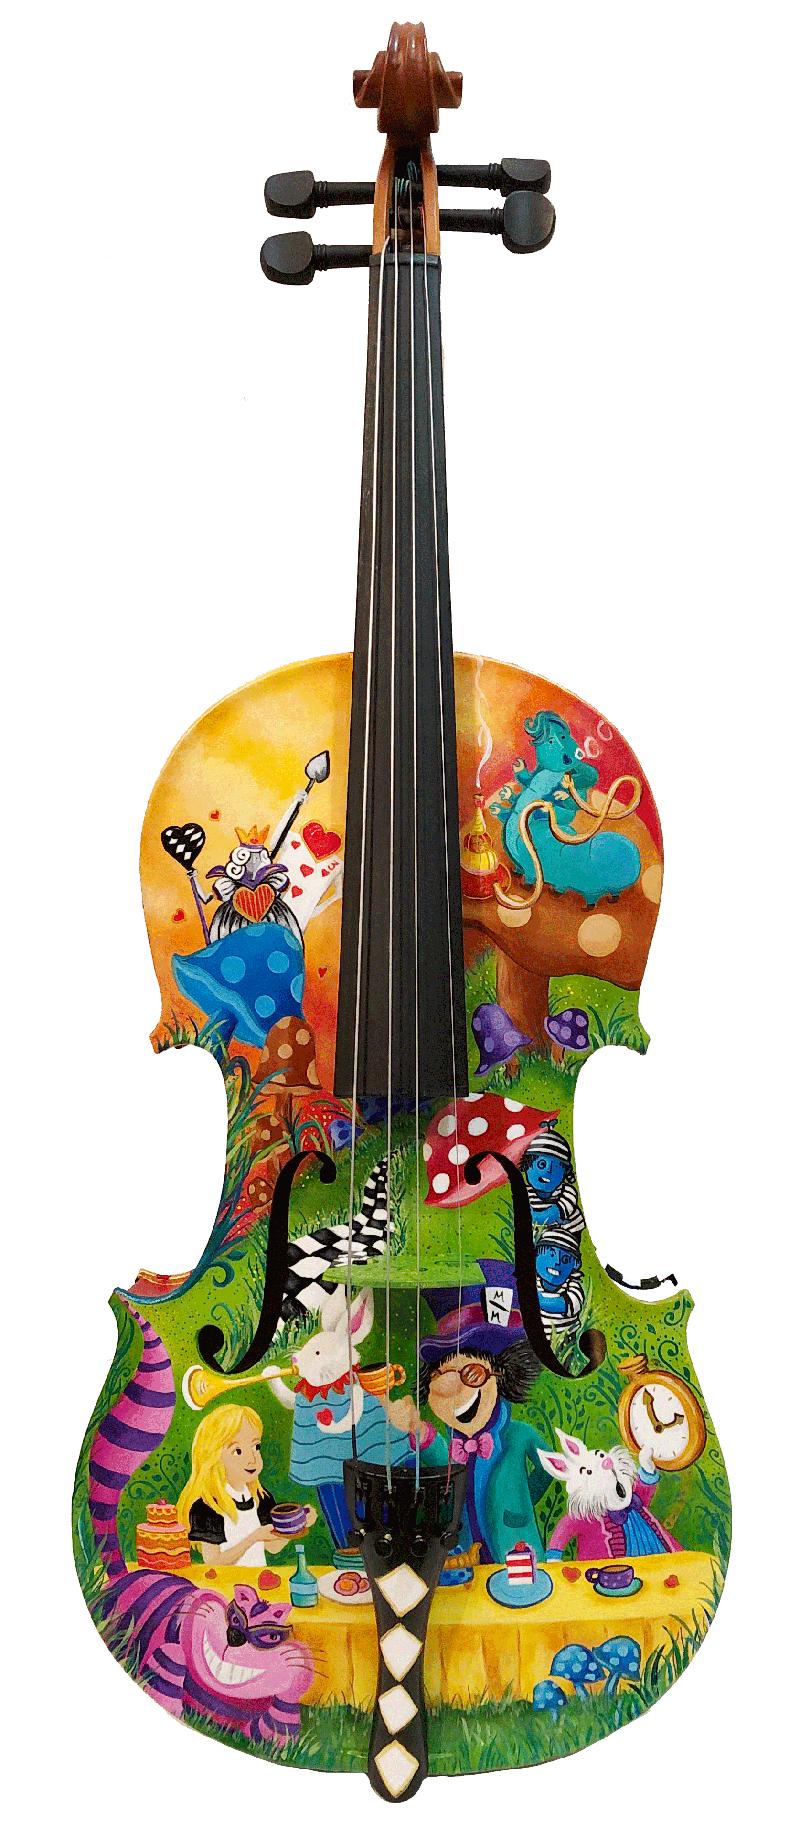 Hand Painted Colorful Violin by Juleez